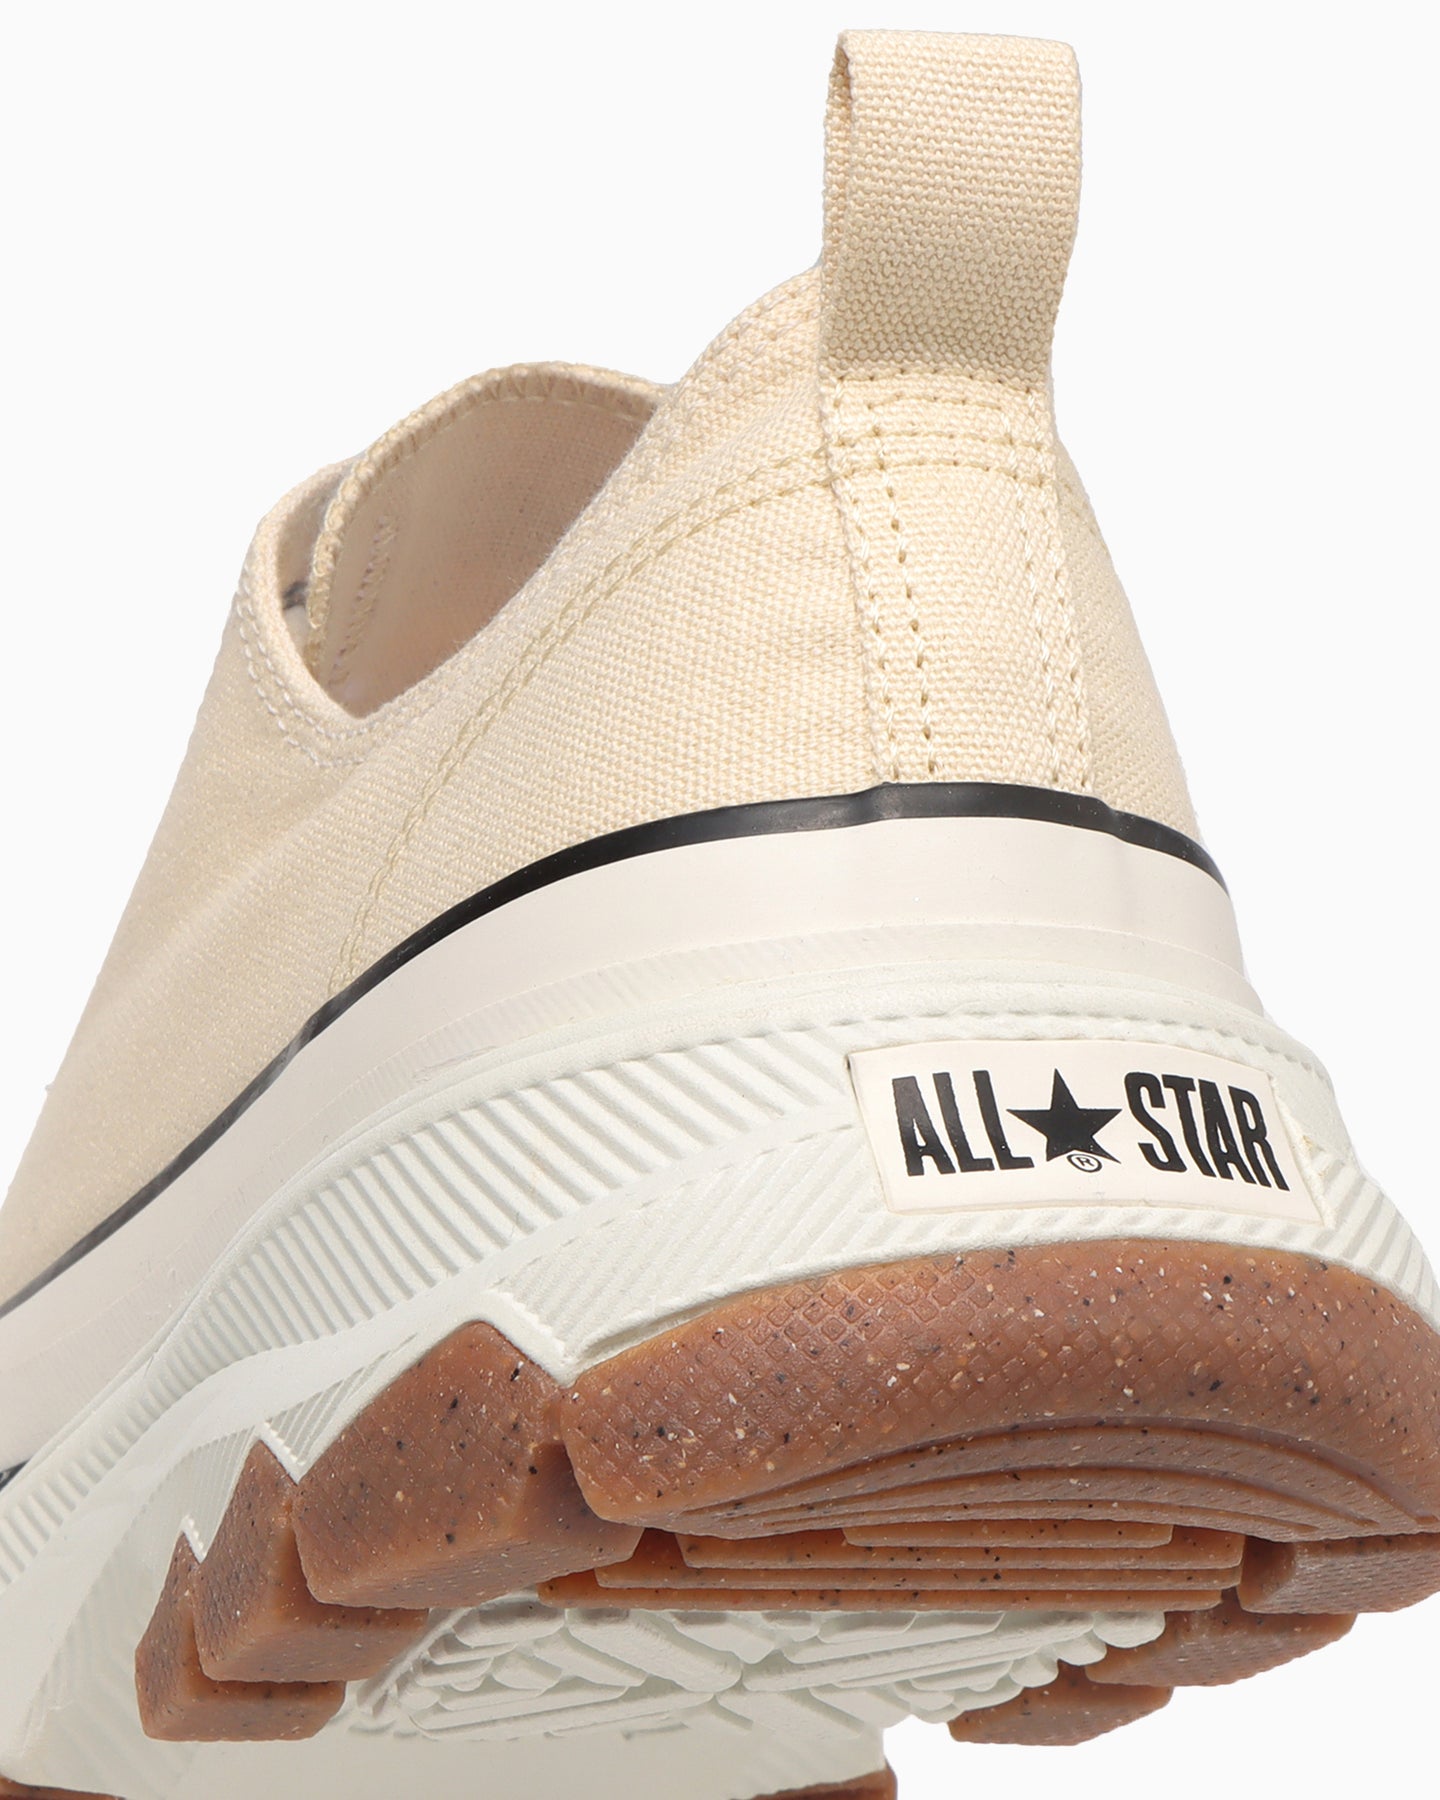 CONVERSE ALL STAR R TREKWAVE OX Butter White/Gum Chuck Taylor Japan  Exclusive